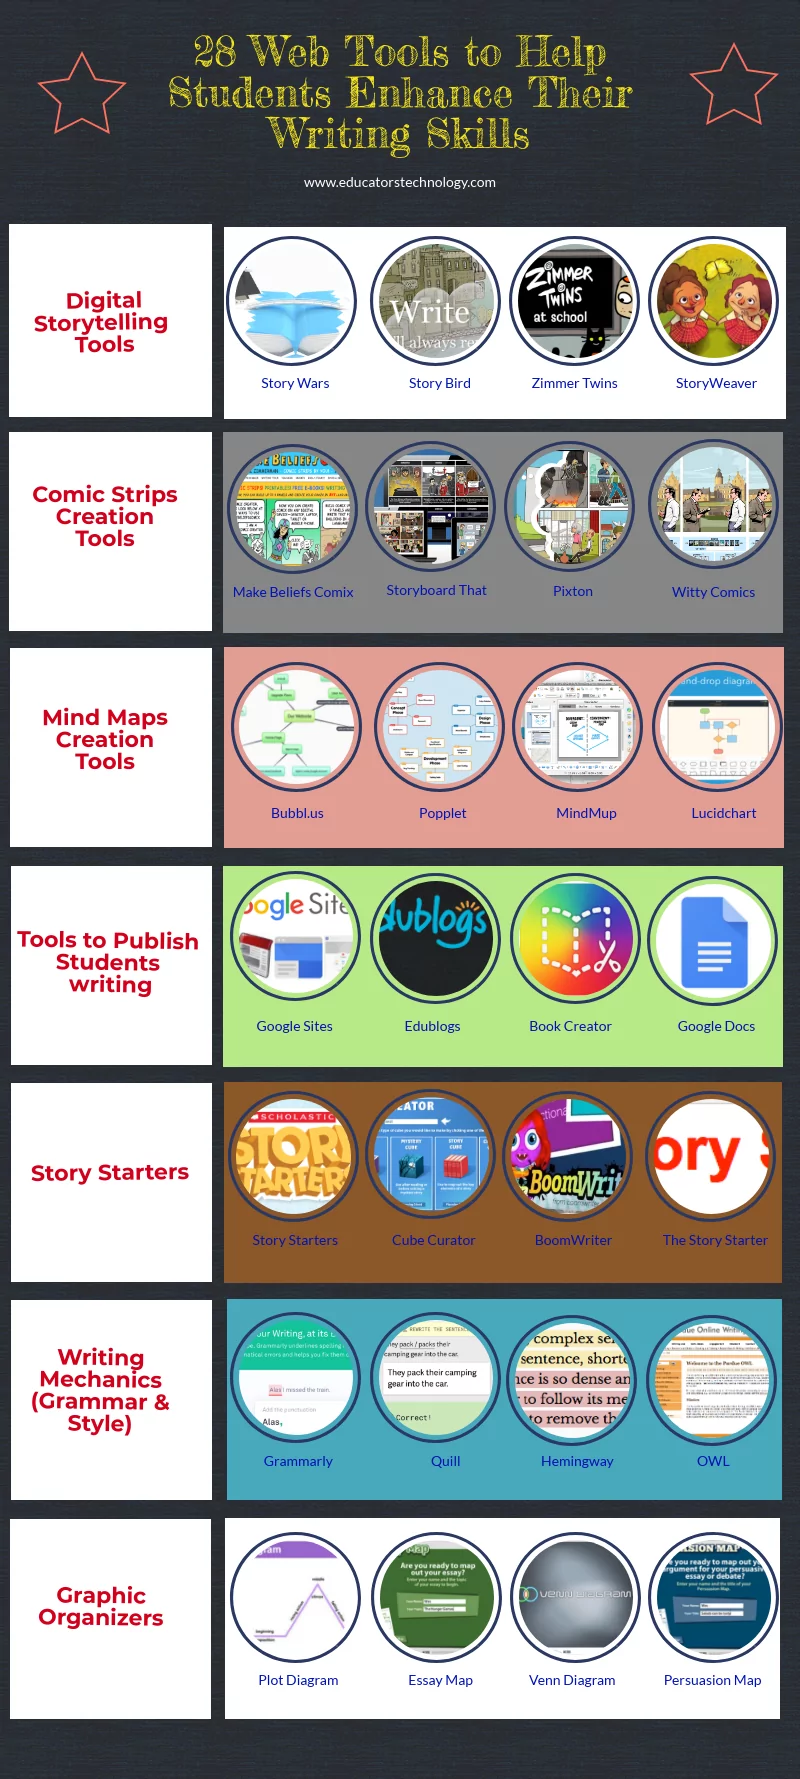 A Handy Infographic Featuring 28 Web Tools to Help Students Enhance Their Writing Skills